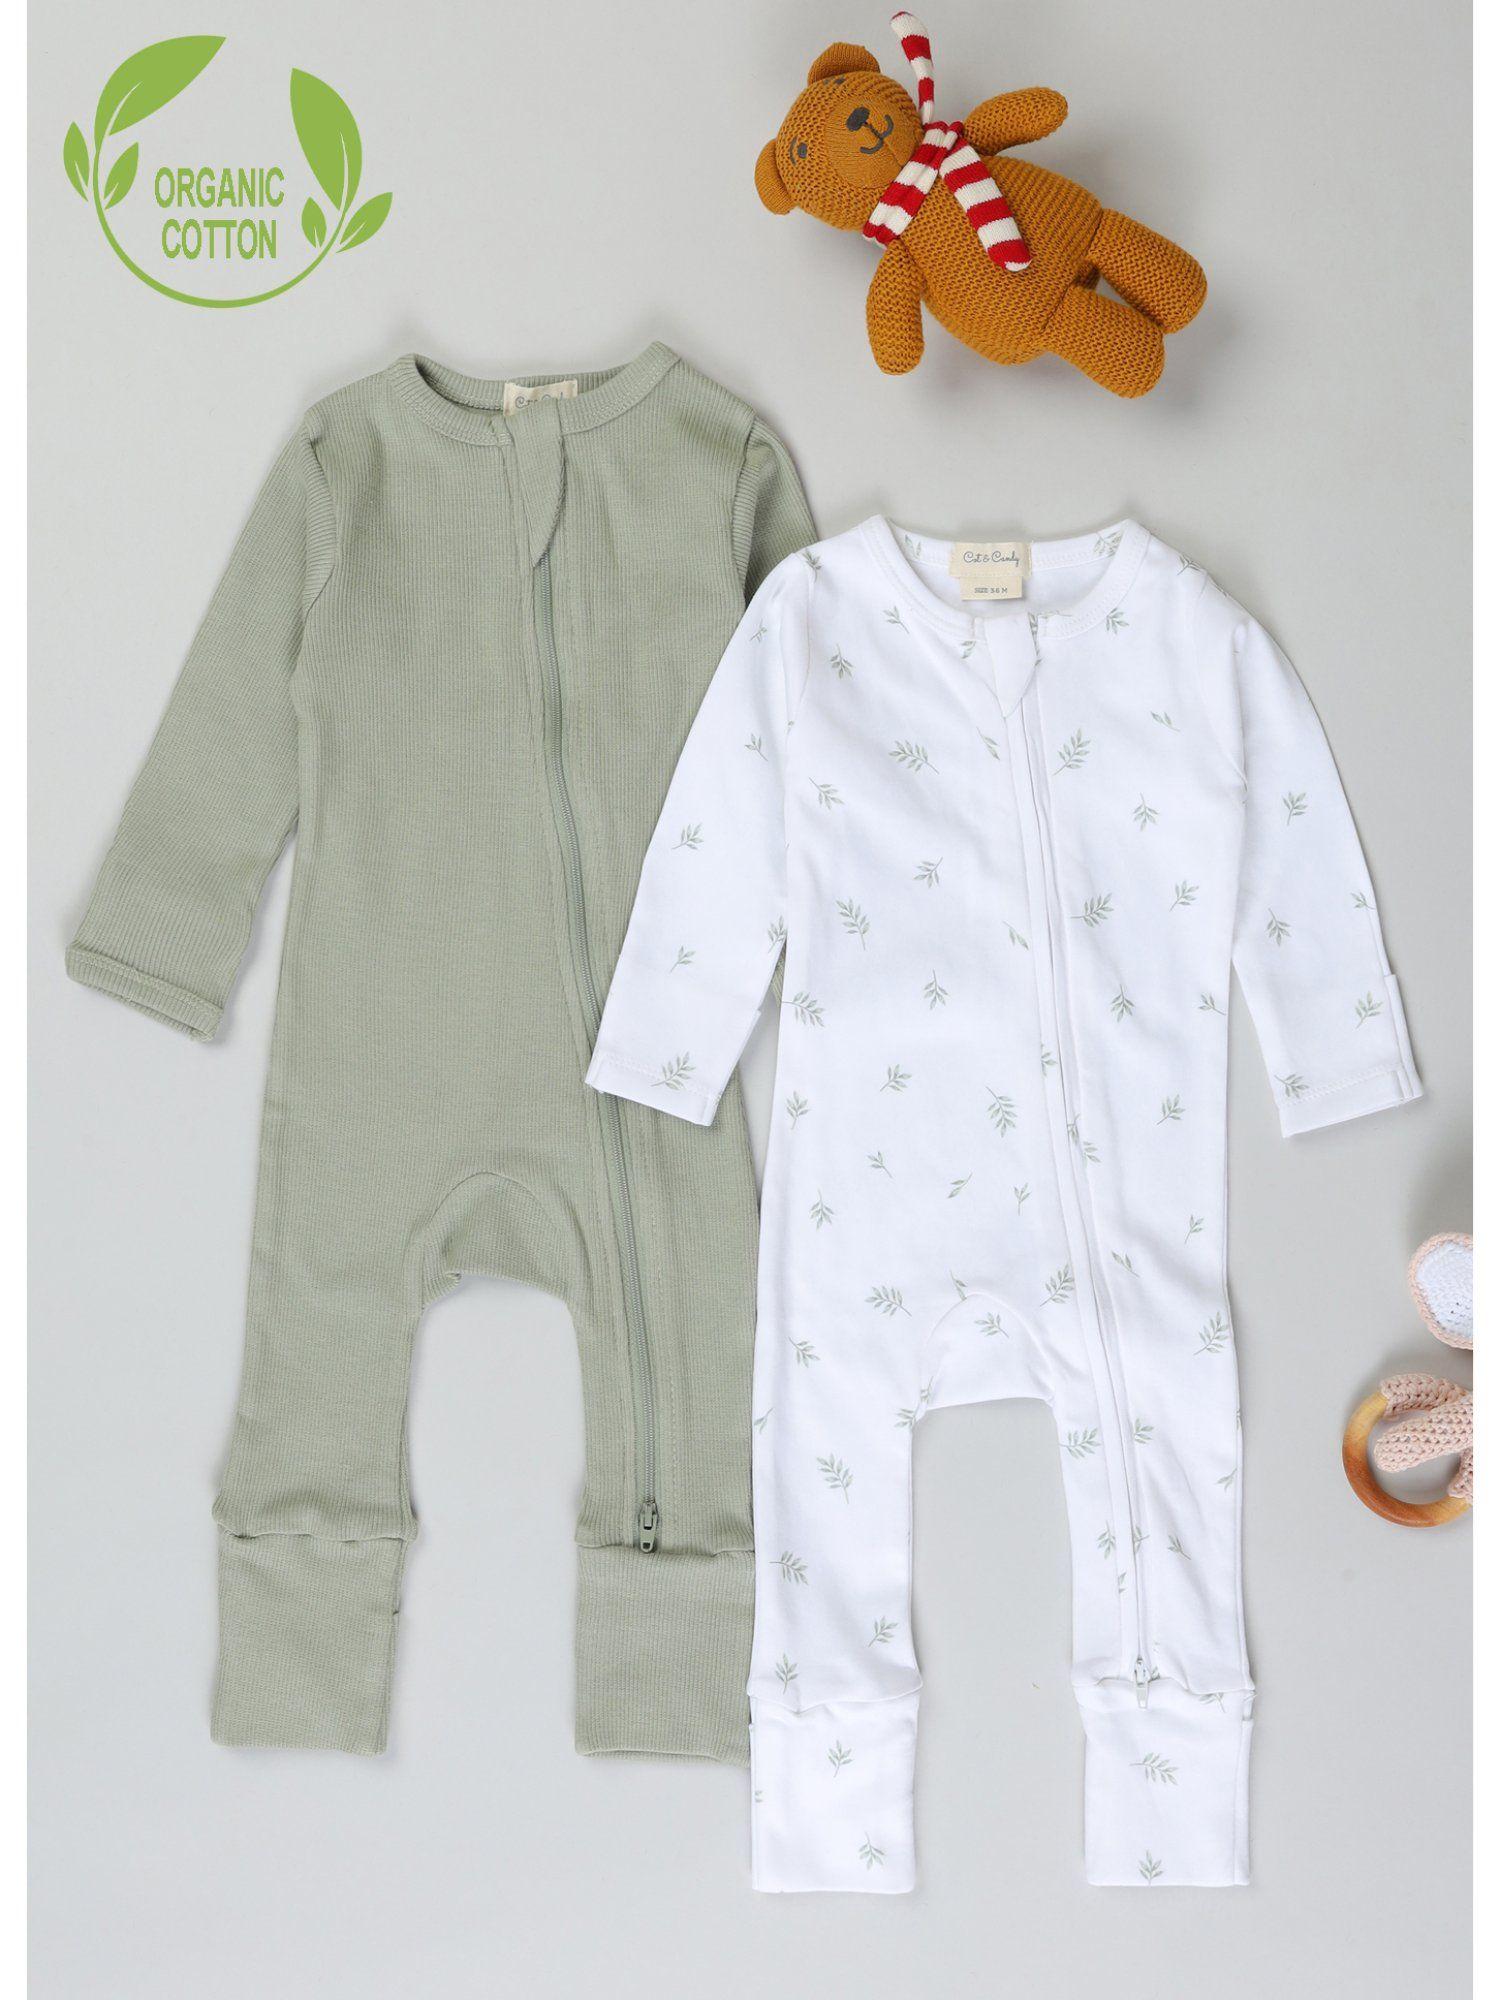 full-sleeve-organic-cotton-kids-printed-zipsuit-(pack-of-2)